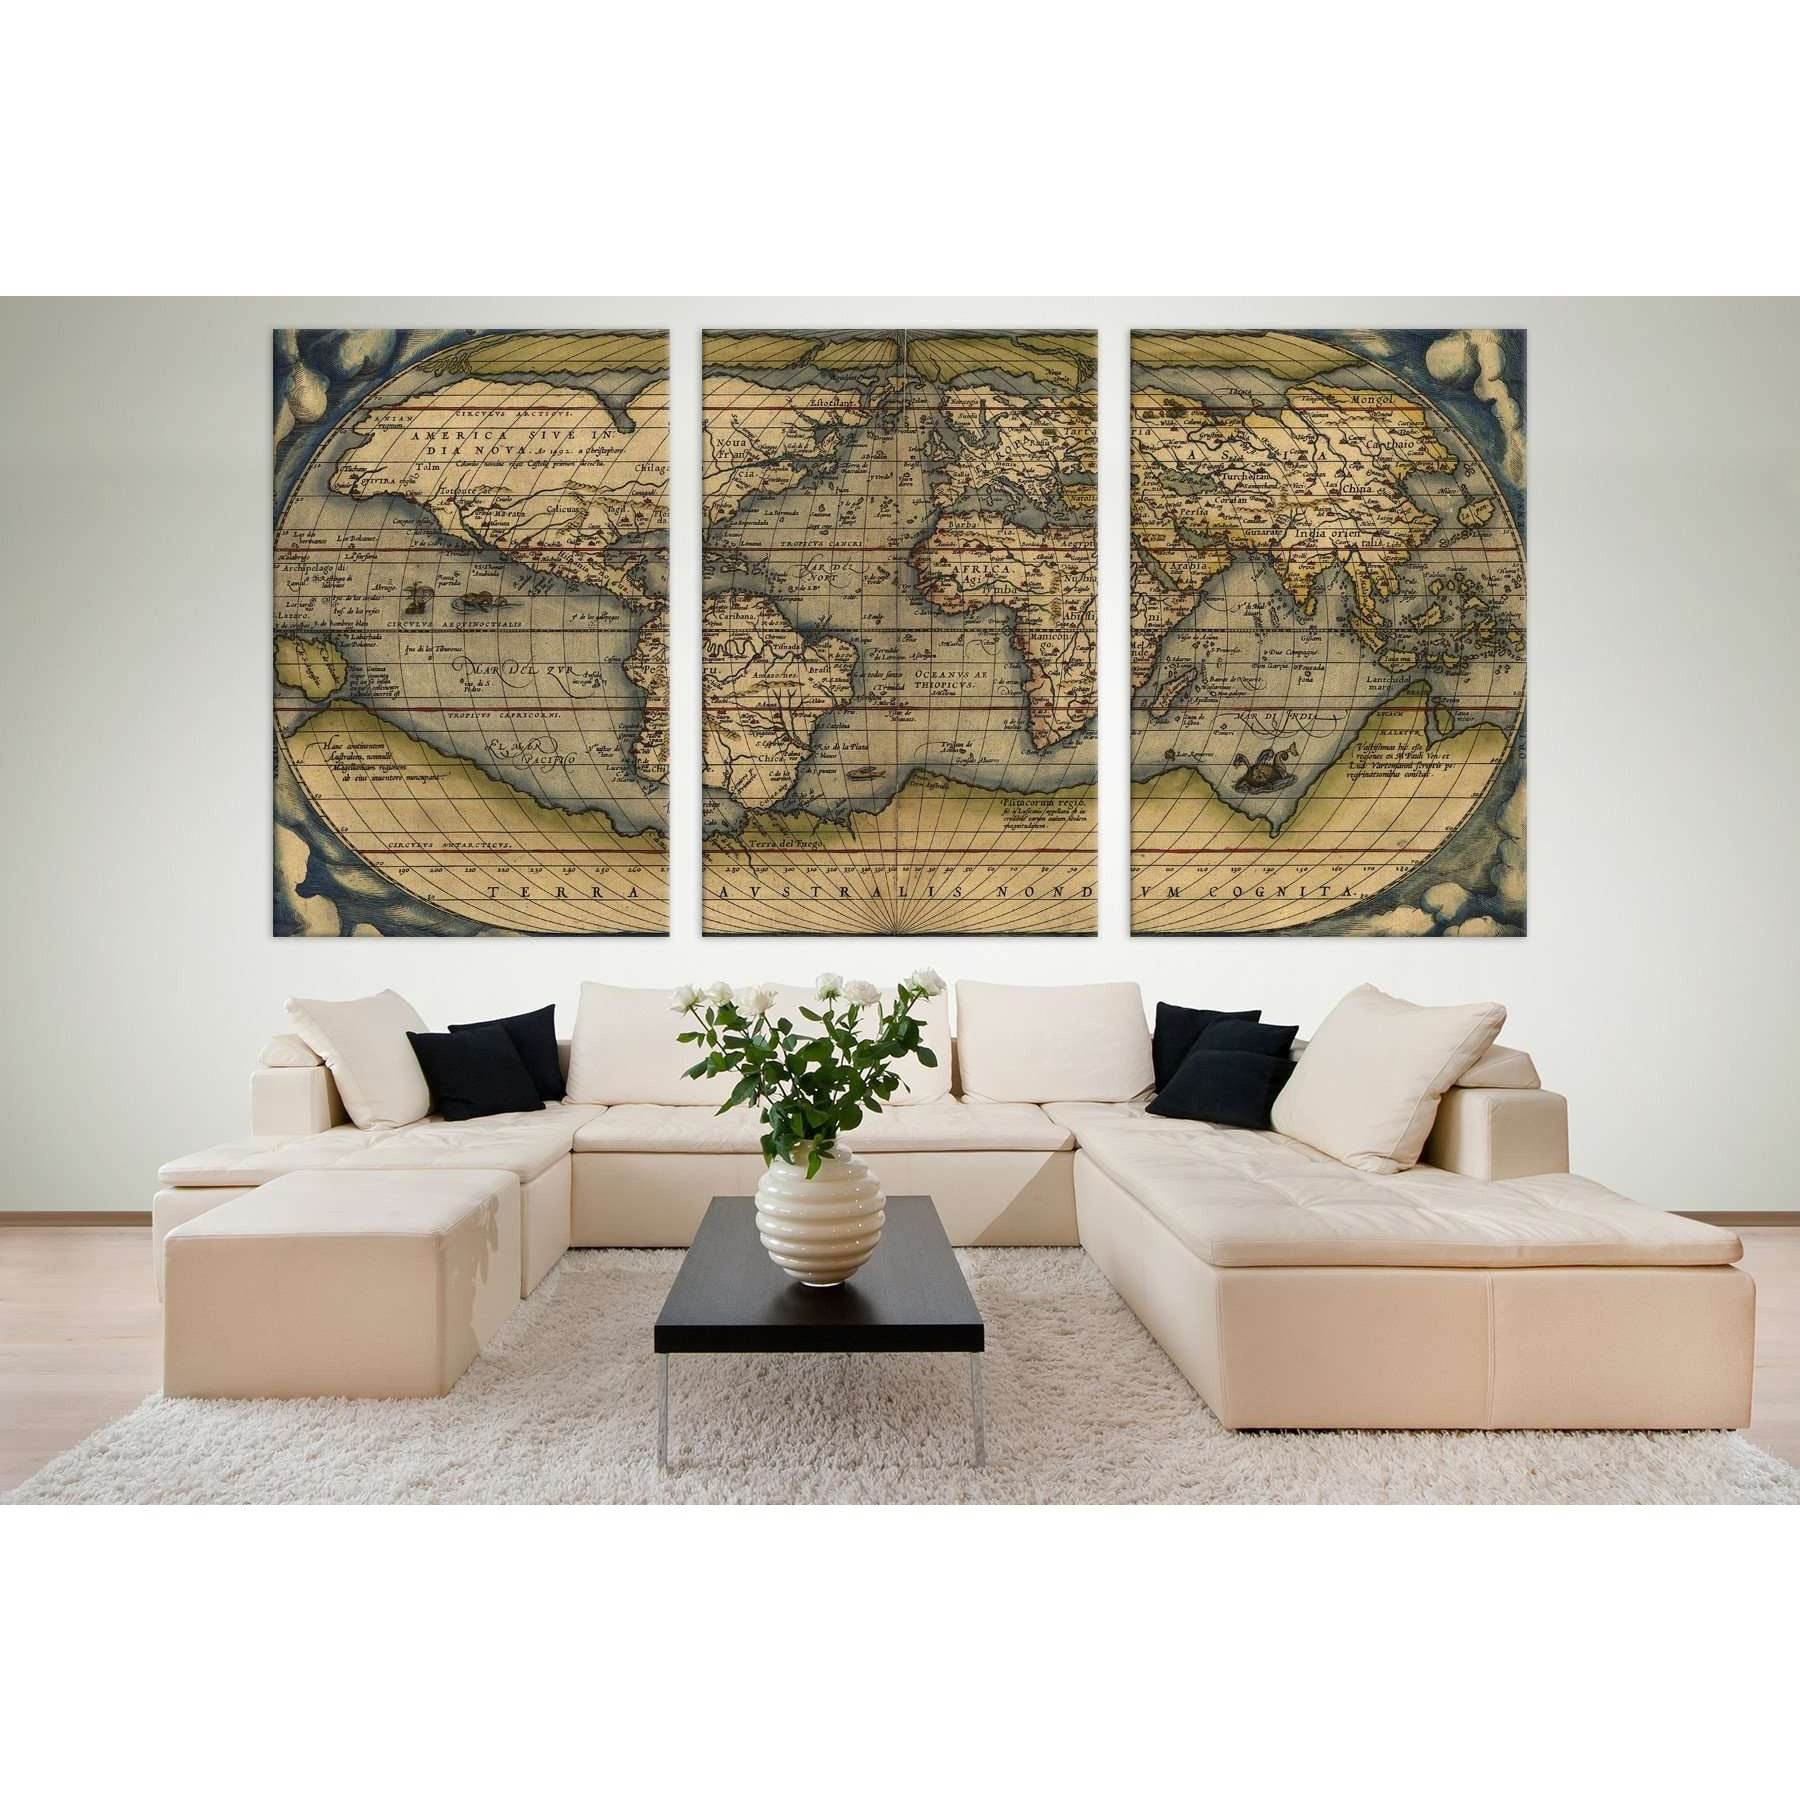 Typus Orbis Terrarum Map Canvas PrintDecorate your walls with a stunning Vintage World Map Canvas Art Print from the world's largest art gallery. Choose from thousands of Vintage artworks with various sizing options. Choose your perfect art print to compl